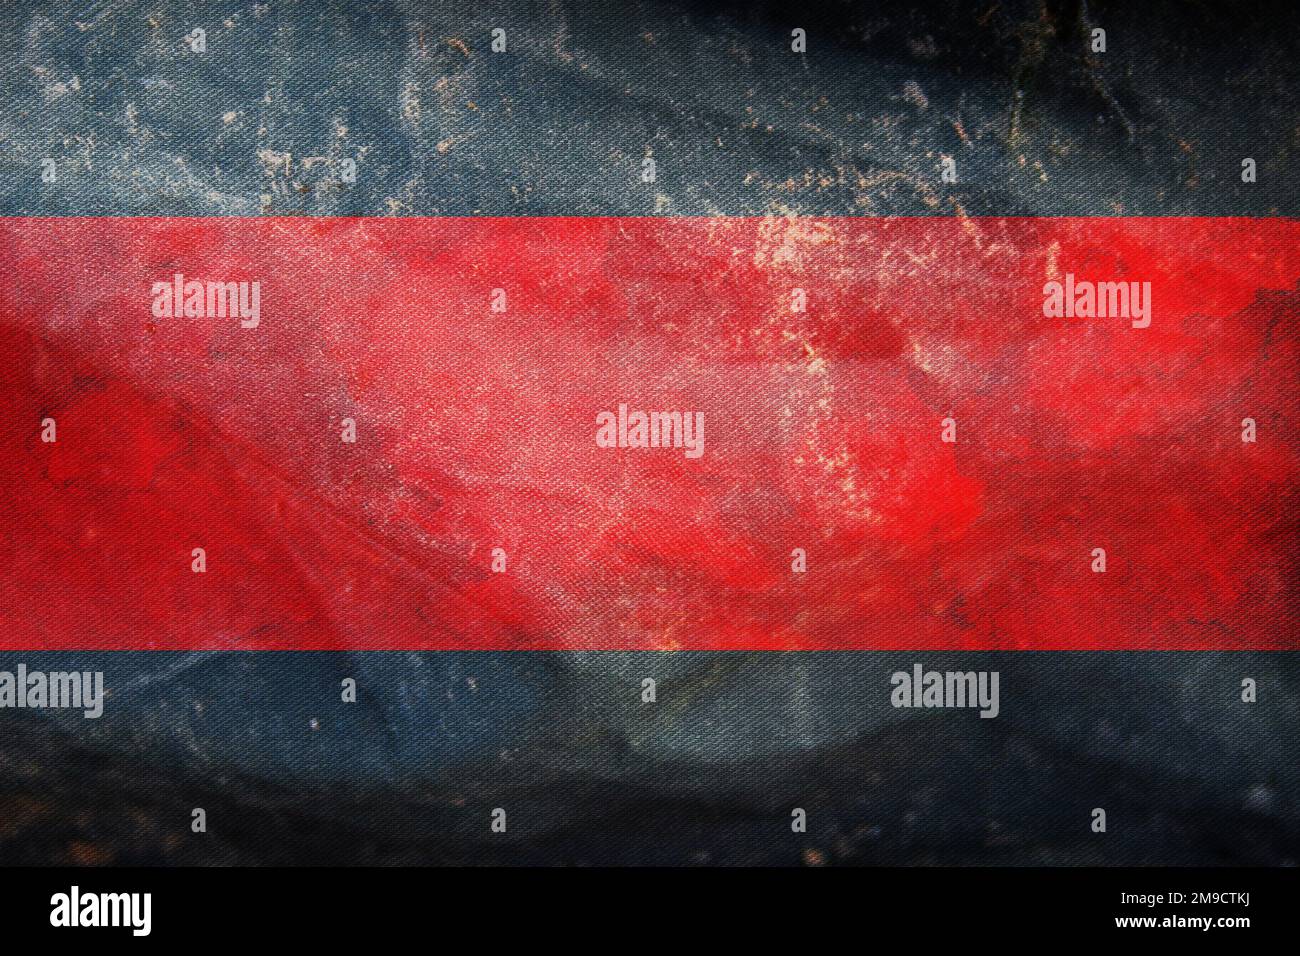 retro flag of Historic peoples Sudeten Germans with grunge texture. flag representing ethnic group or culture, regional authorities. no flagpole. Plan Stock Photo